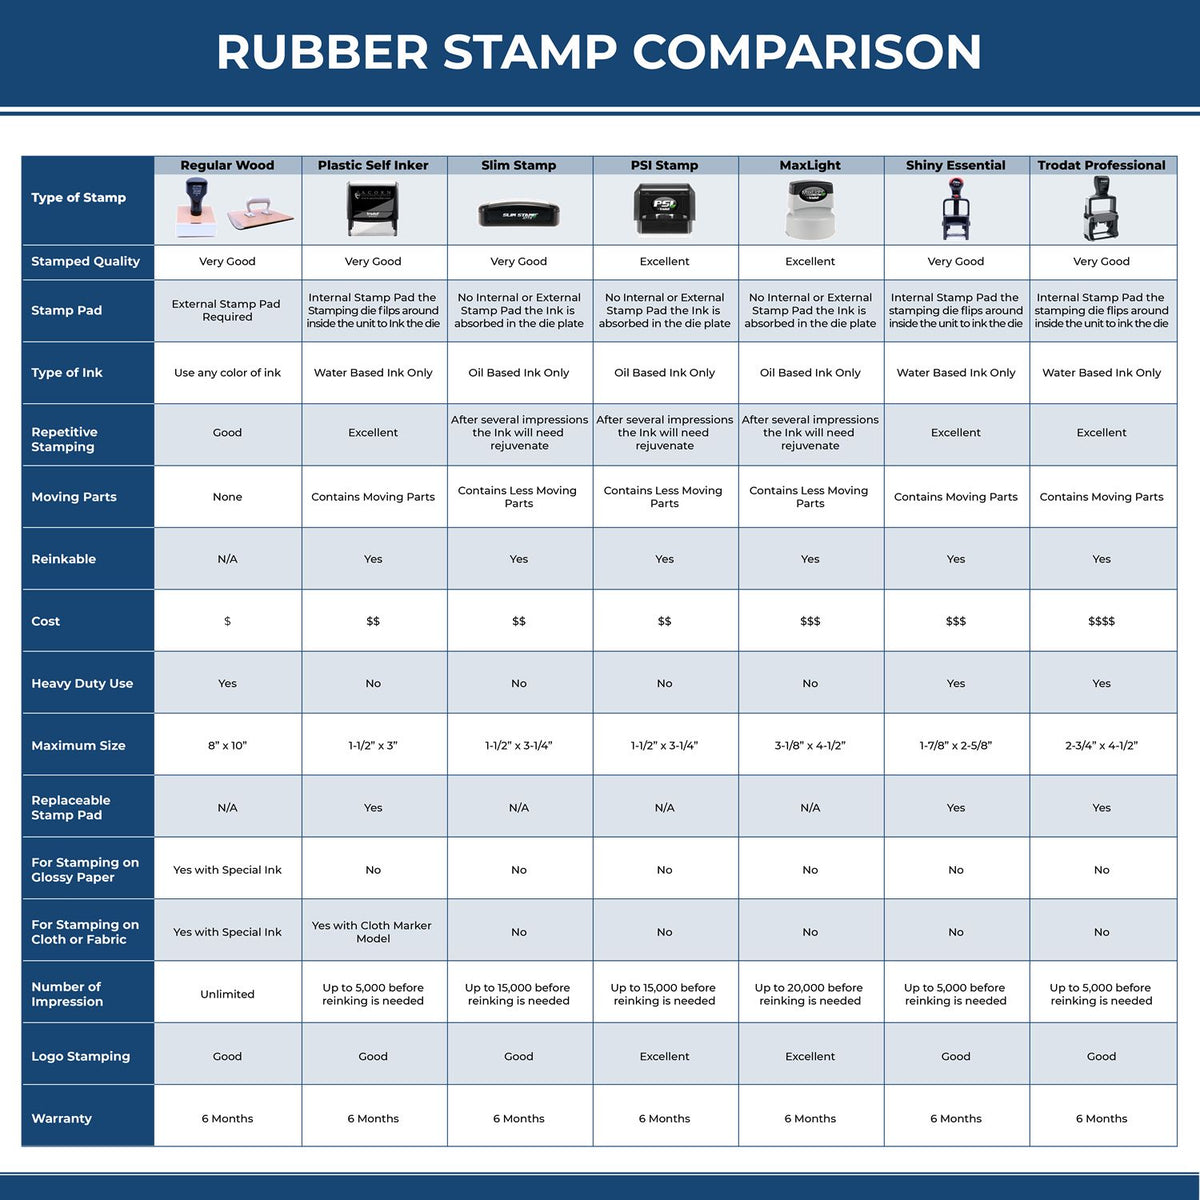 A comparison chart for the different types of mount models available for the Premium MaxLight Pre-Inked Guam Landscape Architectural Stamp.